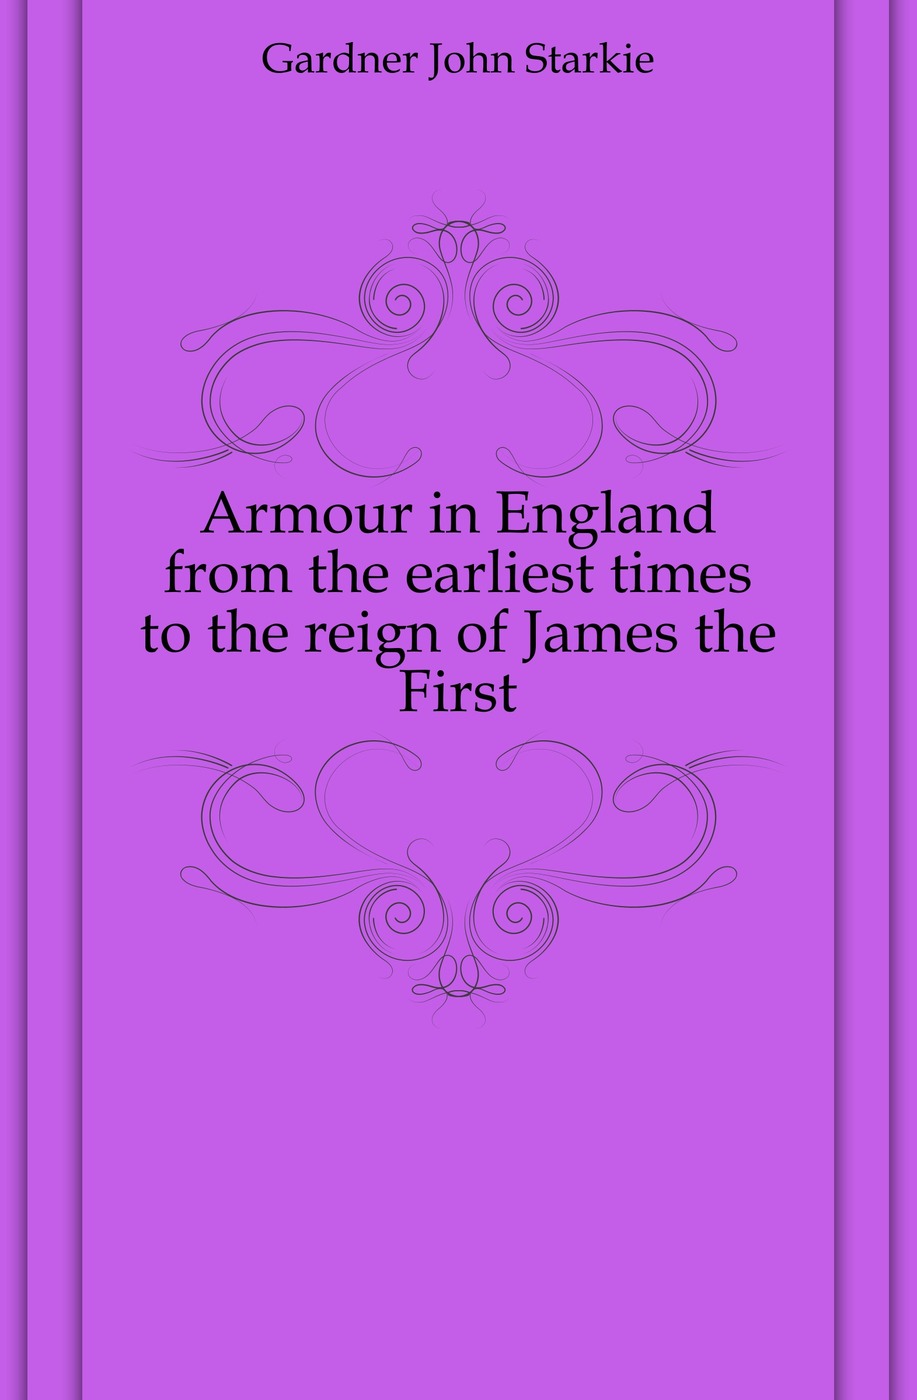 Armour in England from the earliest times to the reign of James the First